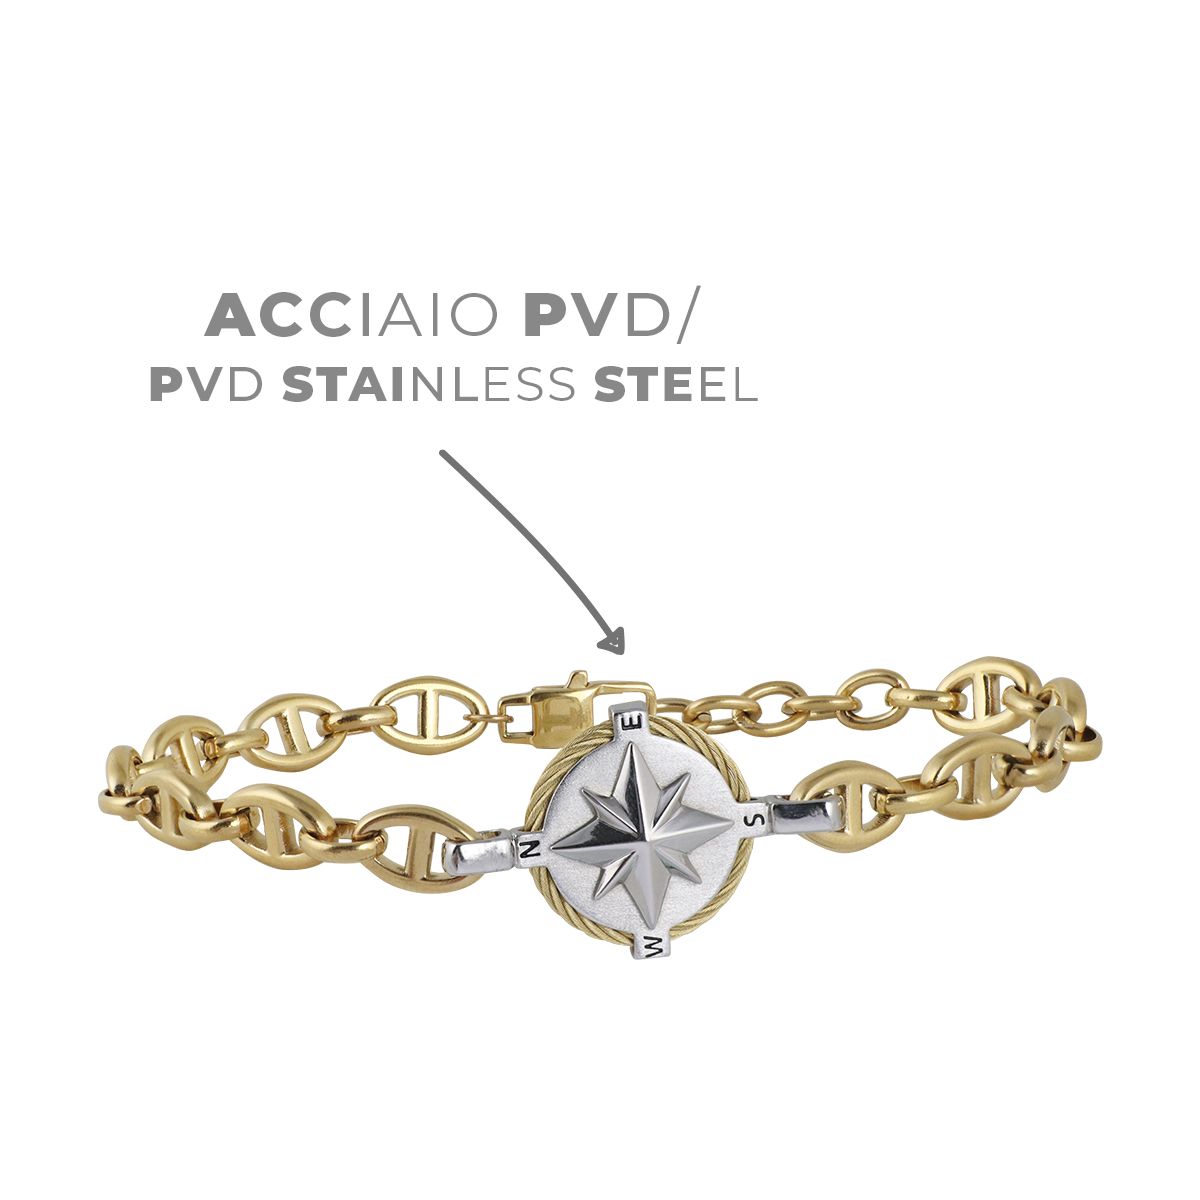 Acciao PVD - PVD Stainless Steel